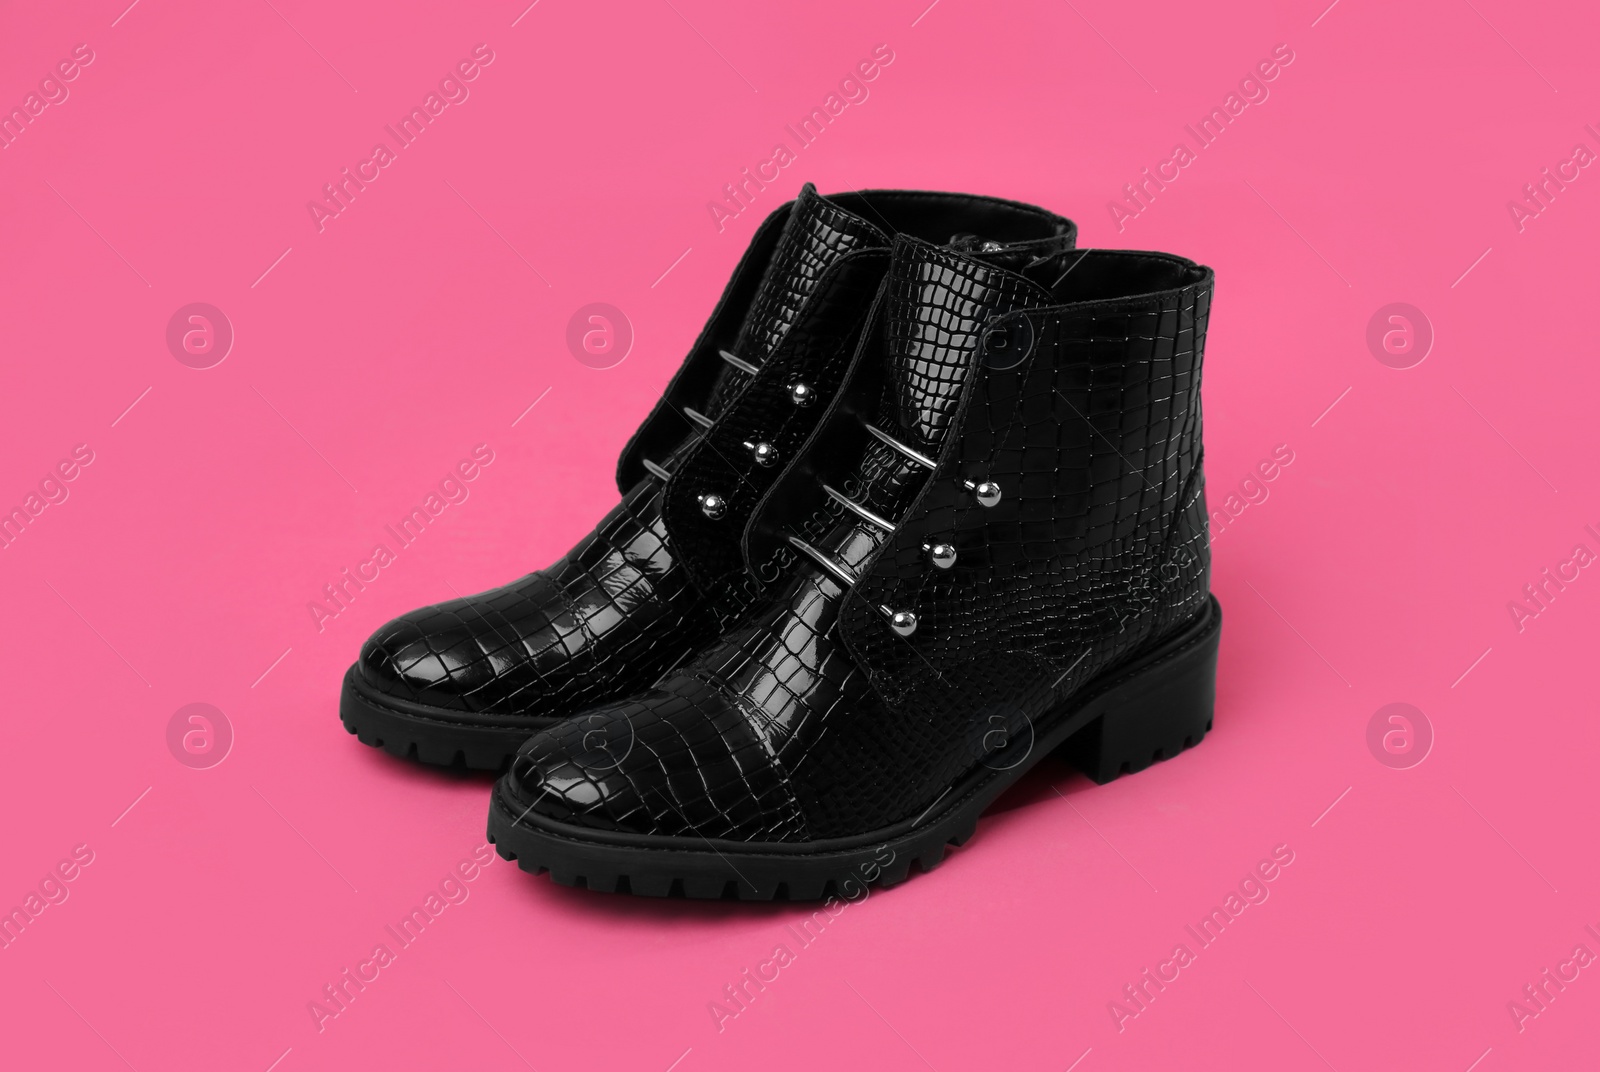 Photo of Pair of stylish ankle boots on pink background